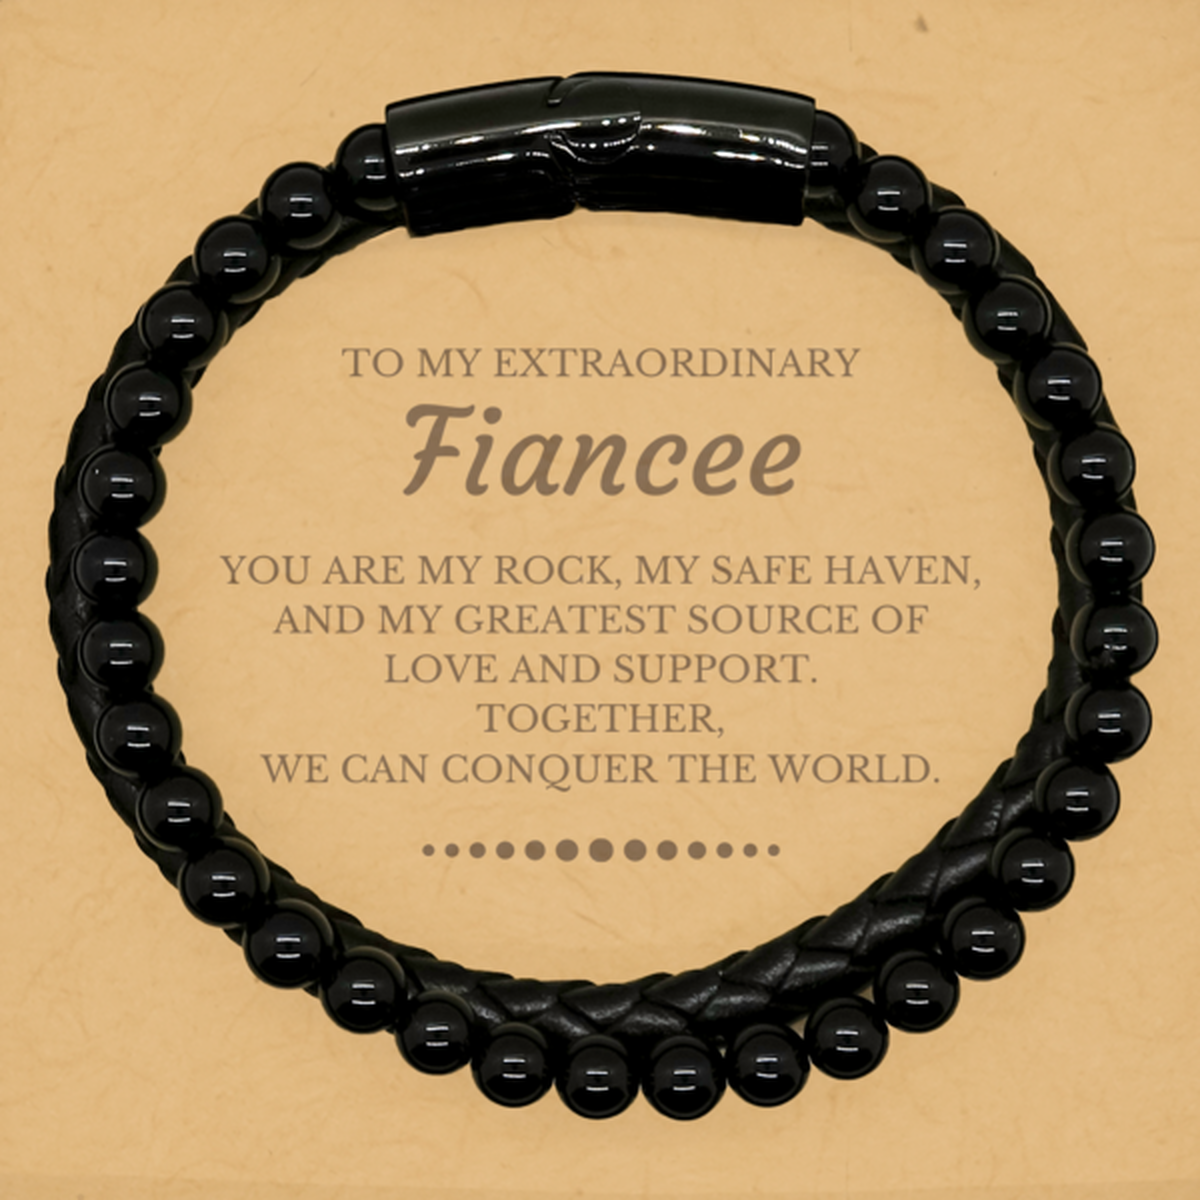 To My Extraordinary Fiancee Gifts, Together, we can conquer the world, Birthday Stone Leather Bracelets For Fiancee, Christmas Gifts For Fiancee